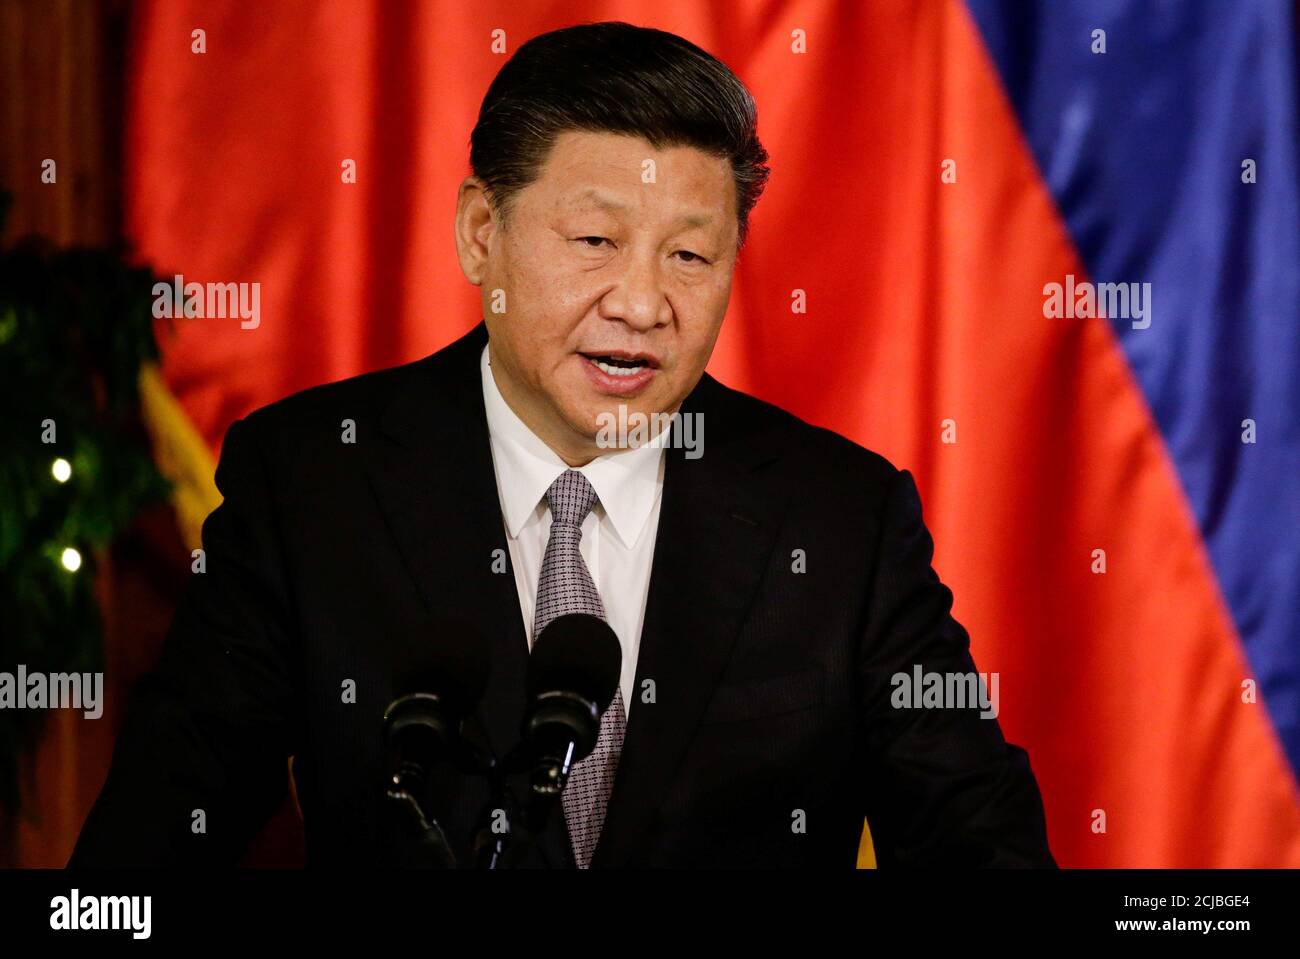 China's President Xi Jinping speaks during a joint news statement at the Malacanang presidential palace in Manila, Philippines, November 20, 2018. Mark Cristino/Pool via Reuters Stock Photo